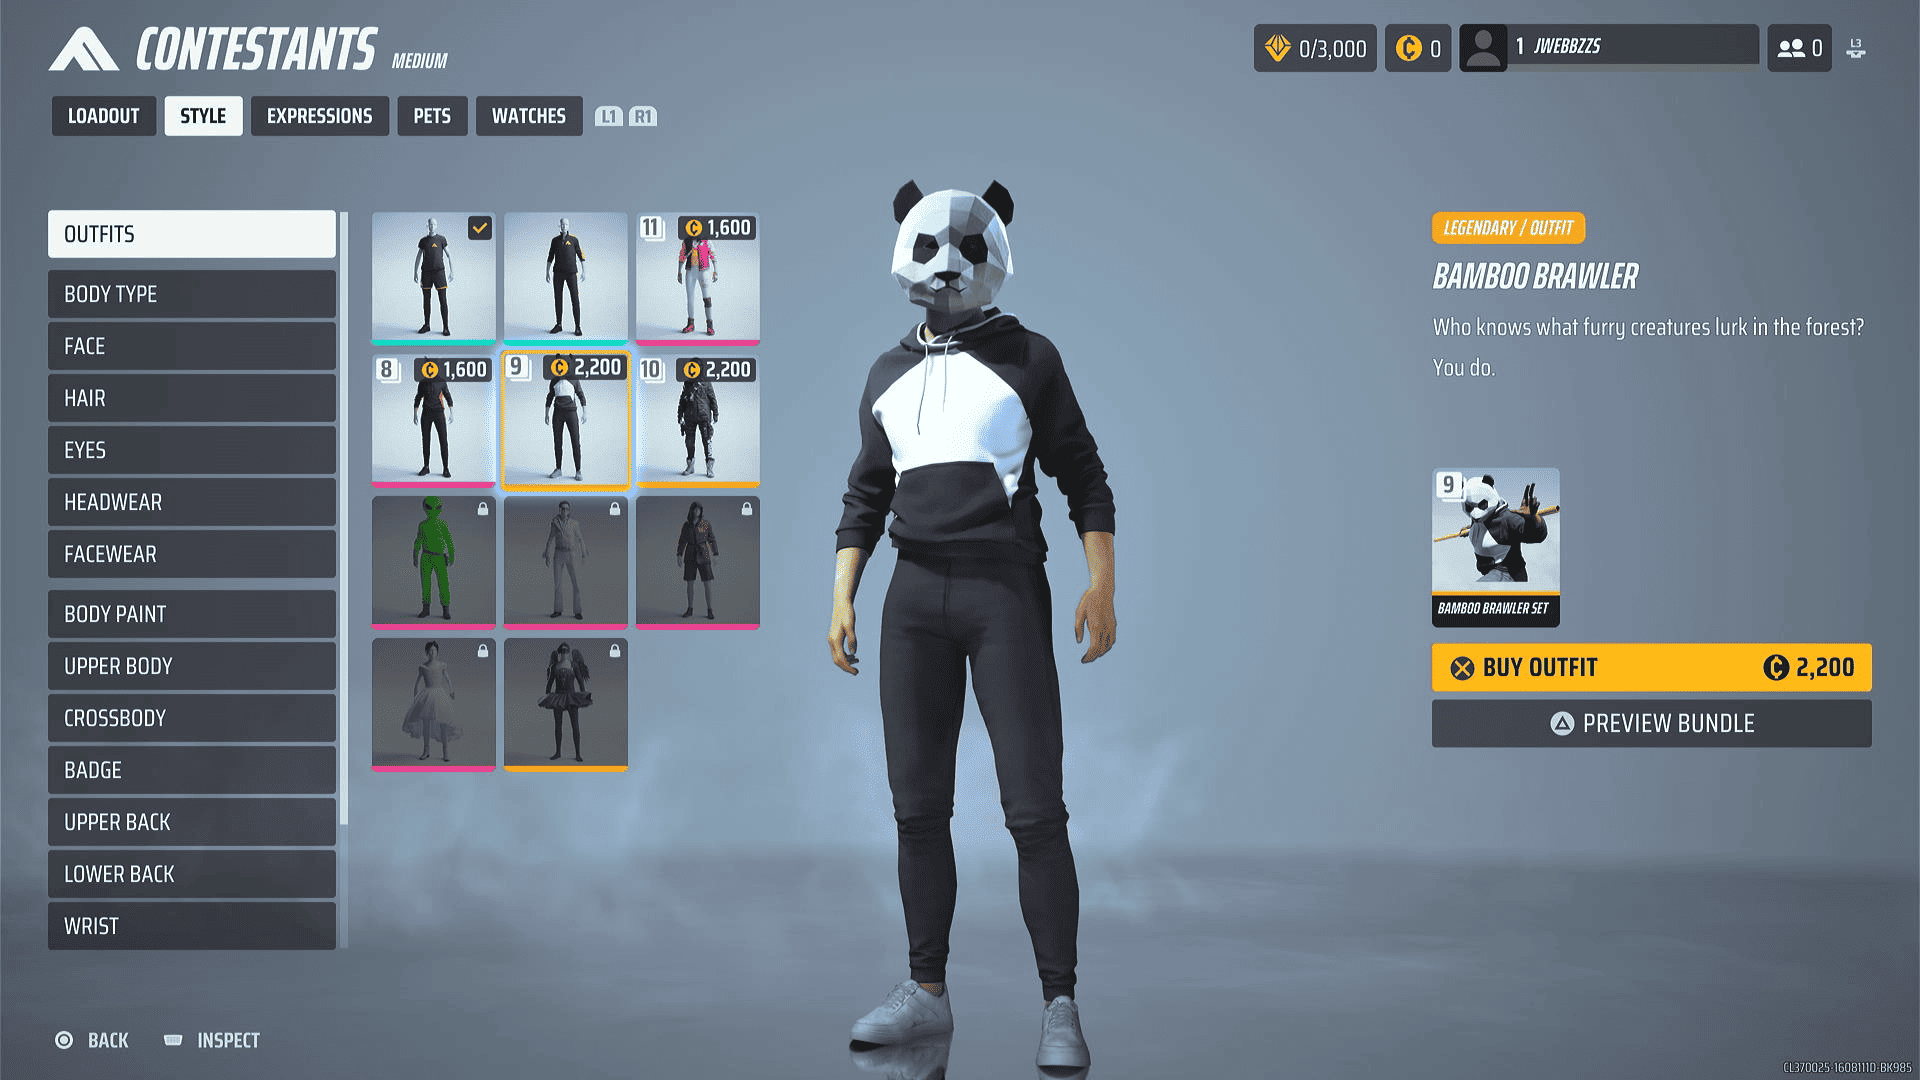 Panda outfit skin in the store in The Finals.